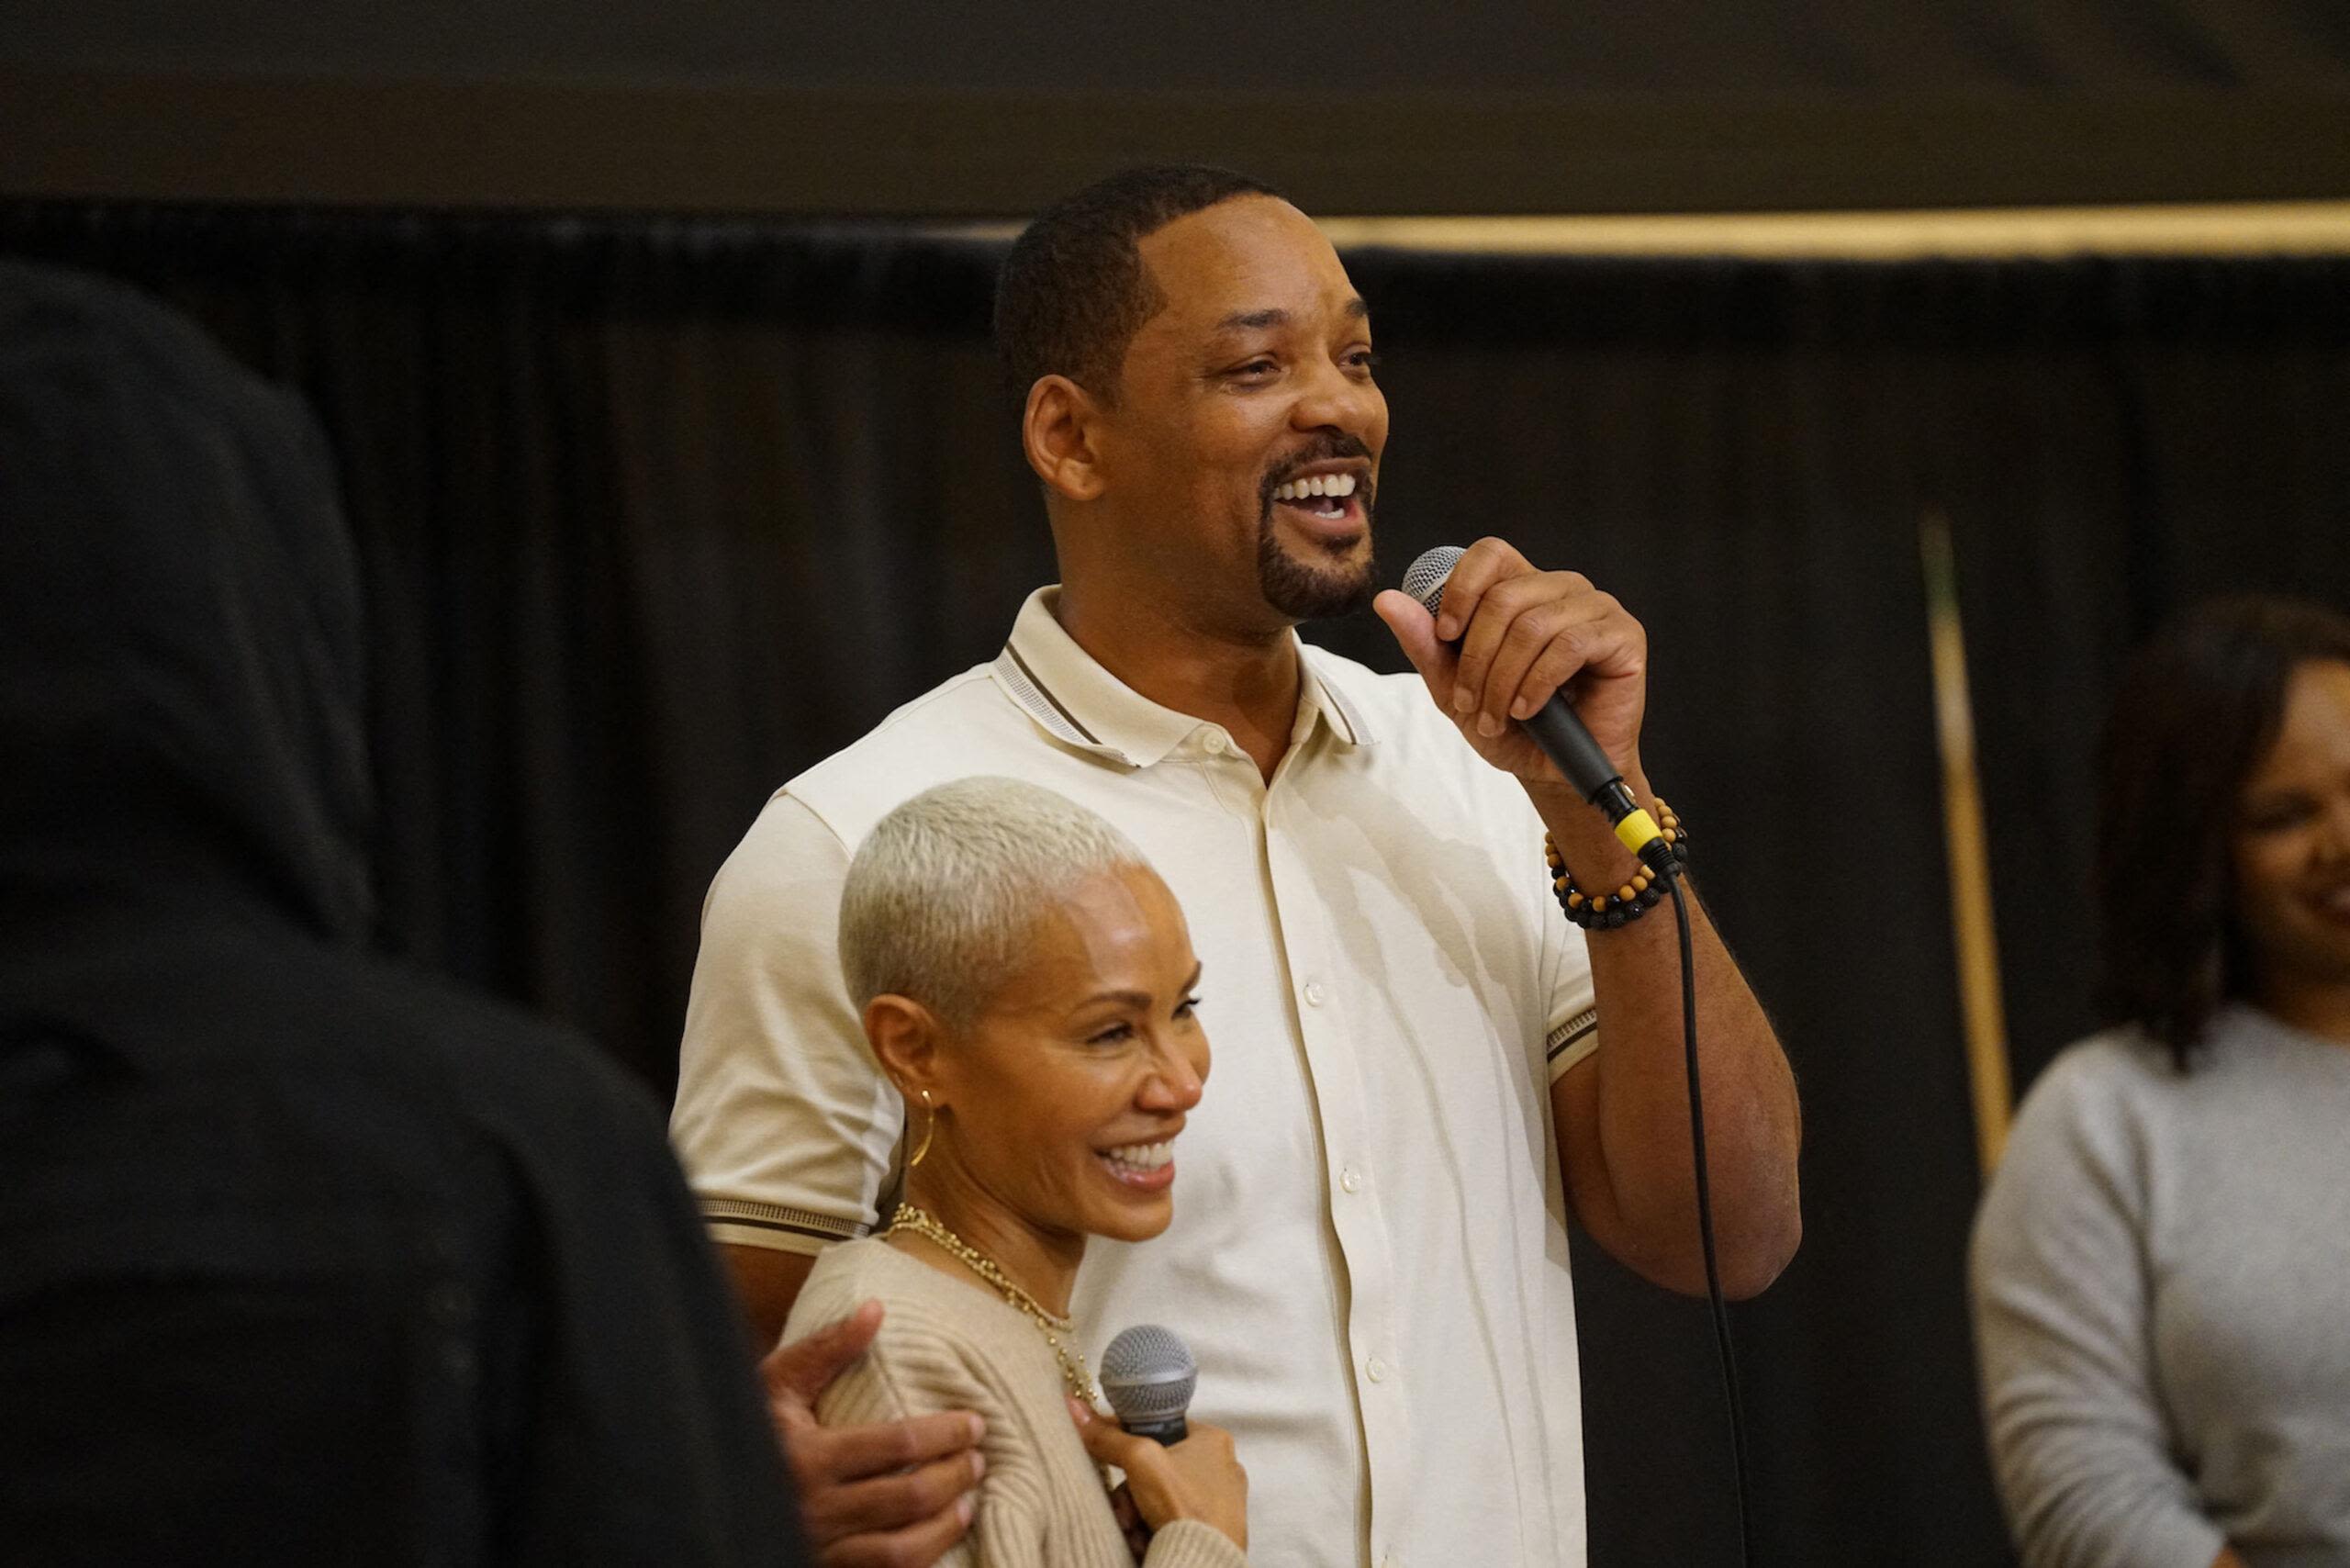 Will Smith Says Estranged Wife Jada Pinkett Smith Is His 'Ride-or-Die'